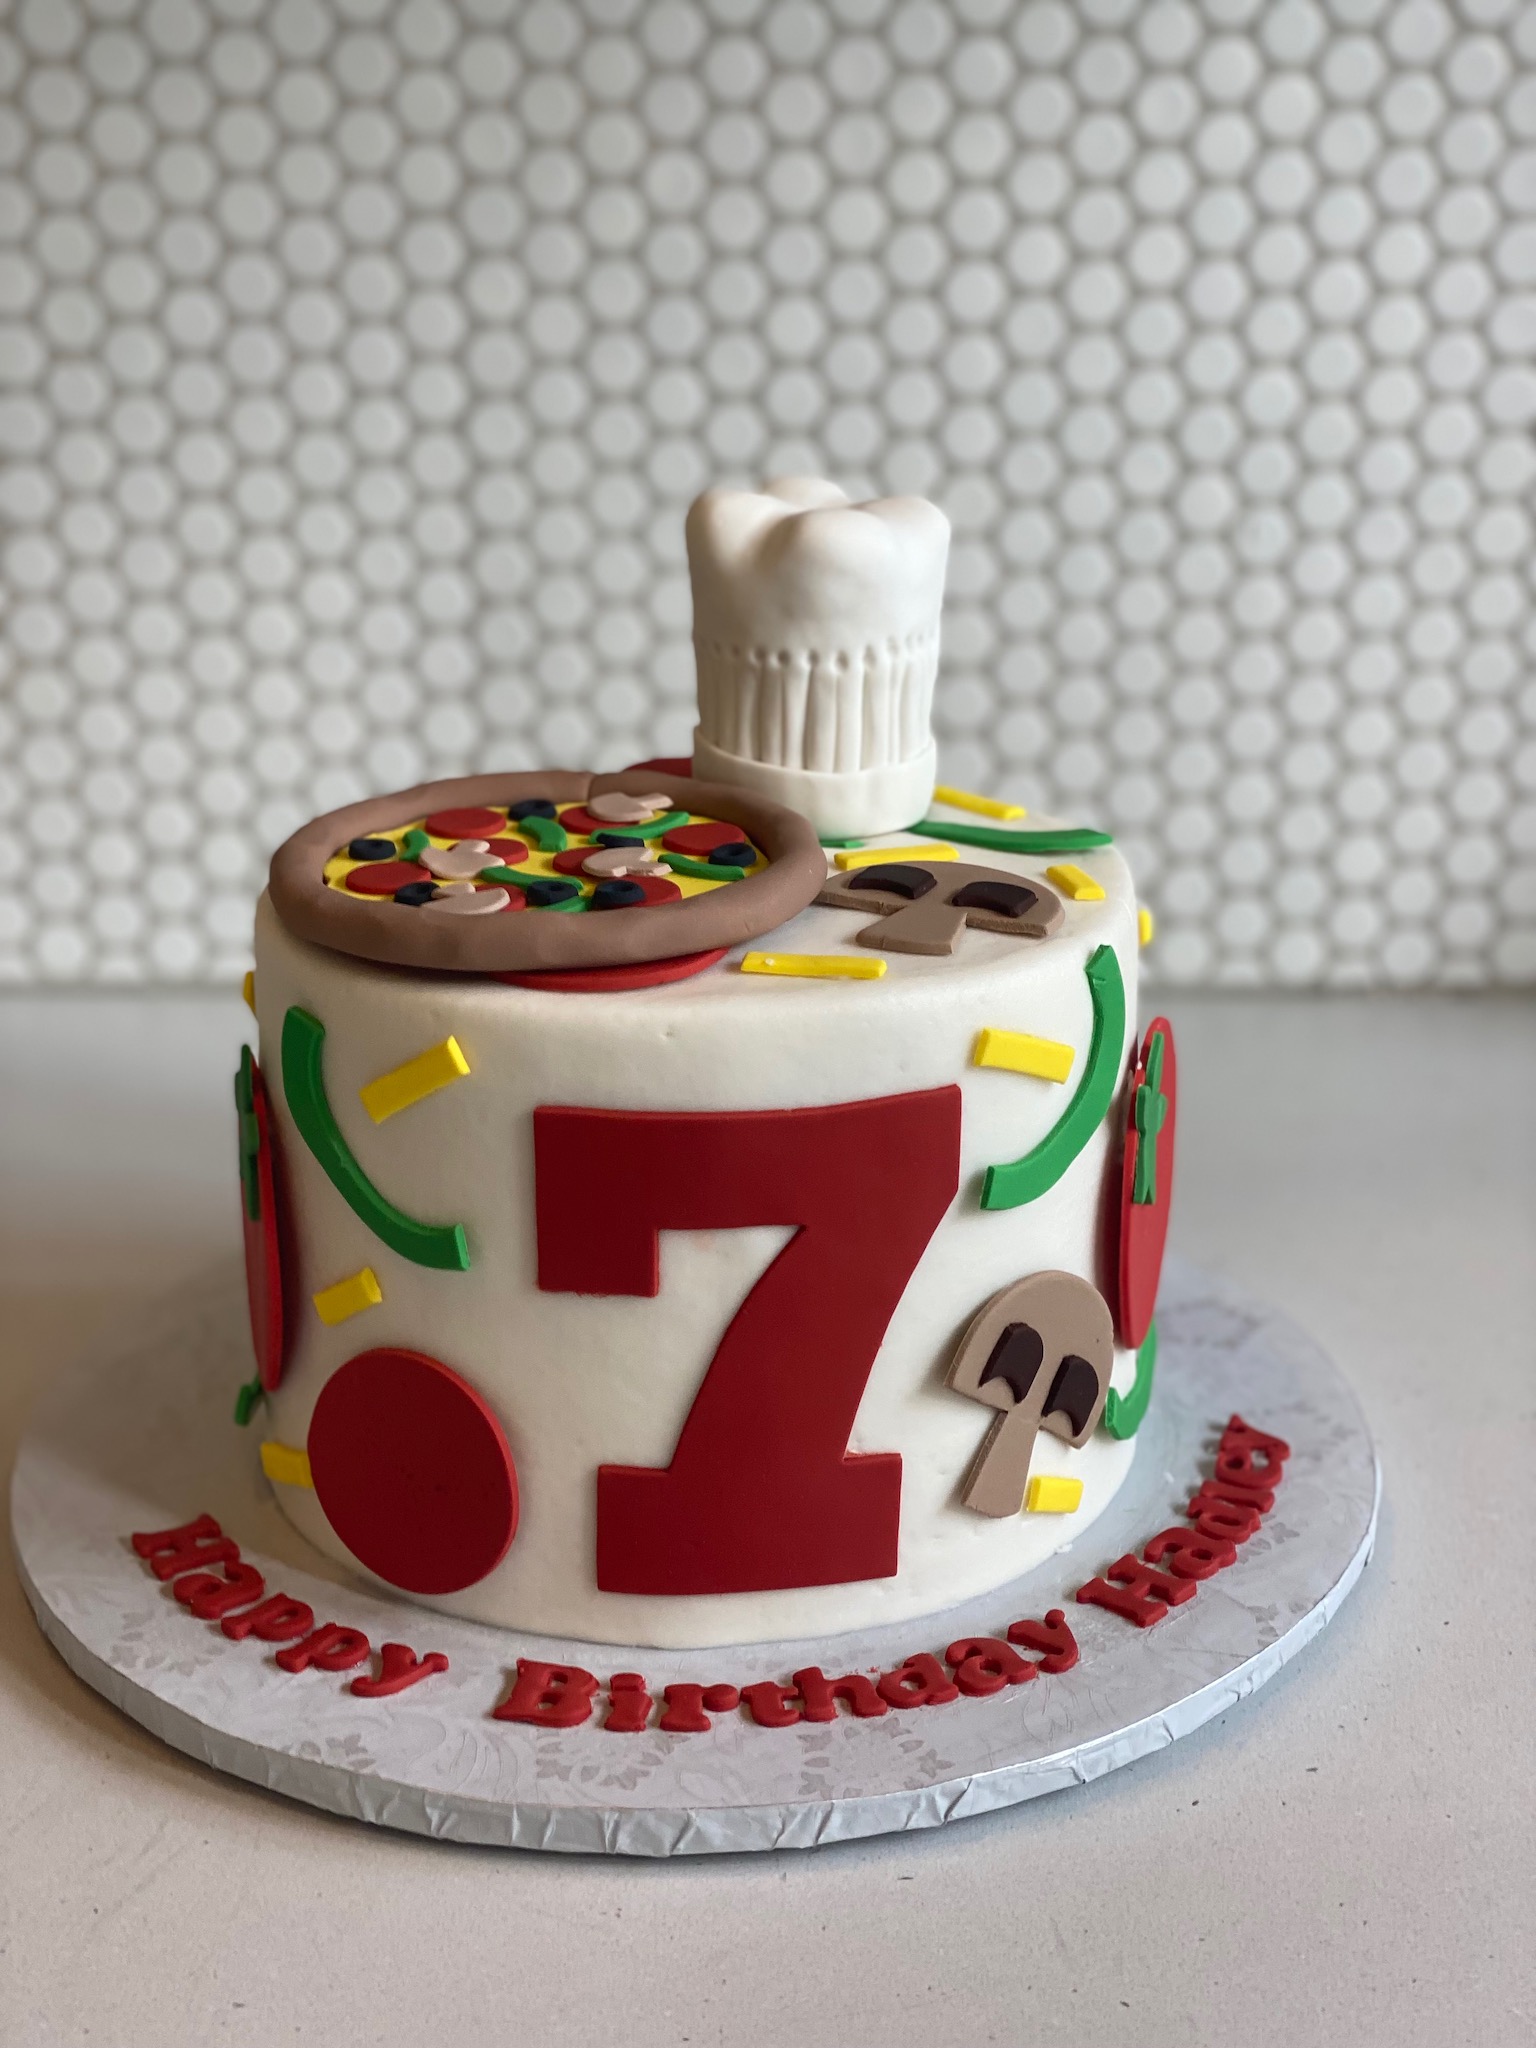 Round white cake in a chef or pizzeria design. The top of the cake includes a pizza made entirely from fondant with toppings of mushrooms, olives, bell peppers, and pepperoni. The top also has a 3d Chef's hat that is also made from fondant. The sides of the cake are decorated with fondant pizza toppings, as if they've been sprinkled down the sides, and also has a fondant number 7. The message Happy Birthday Hadley is spelled out using fondant on the cake board.